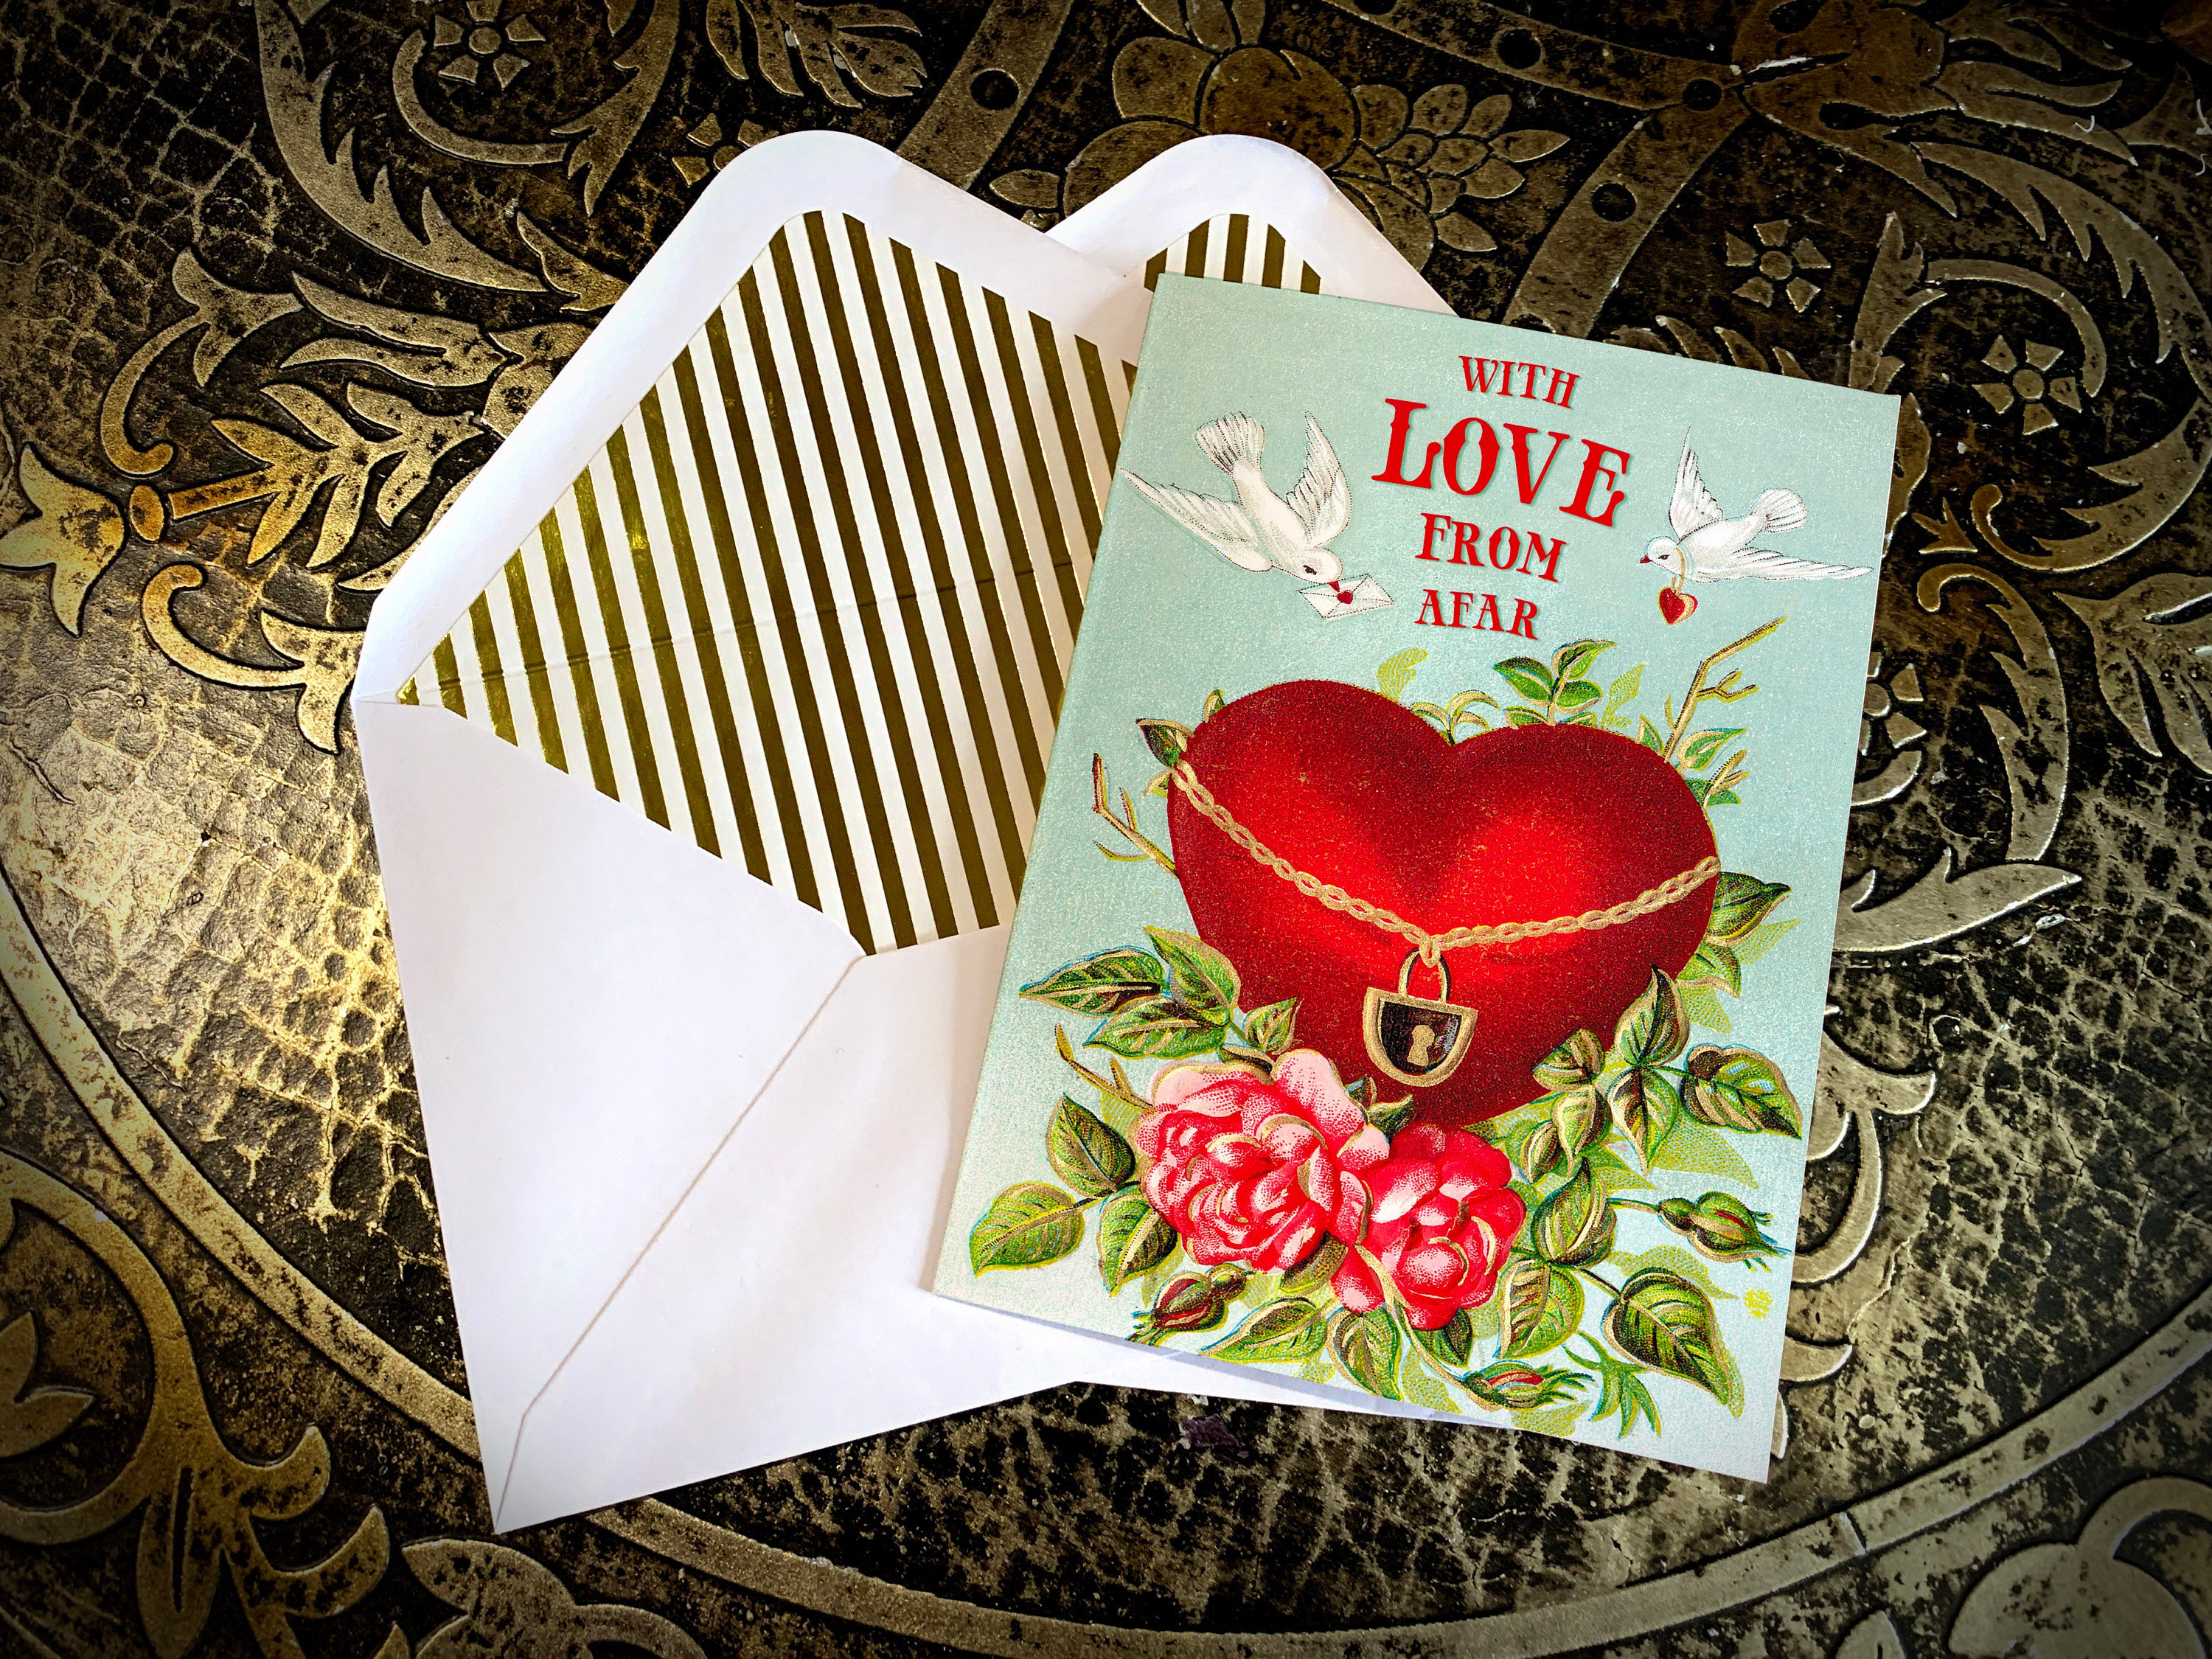 Victorian Valentine's Day Greeting Card, Love From Afar, for Friends and Family, with Elegant Gold Foil Envelope